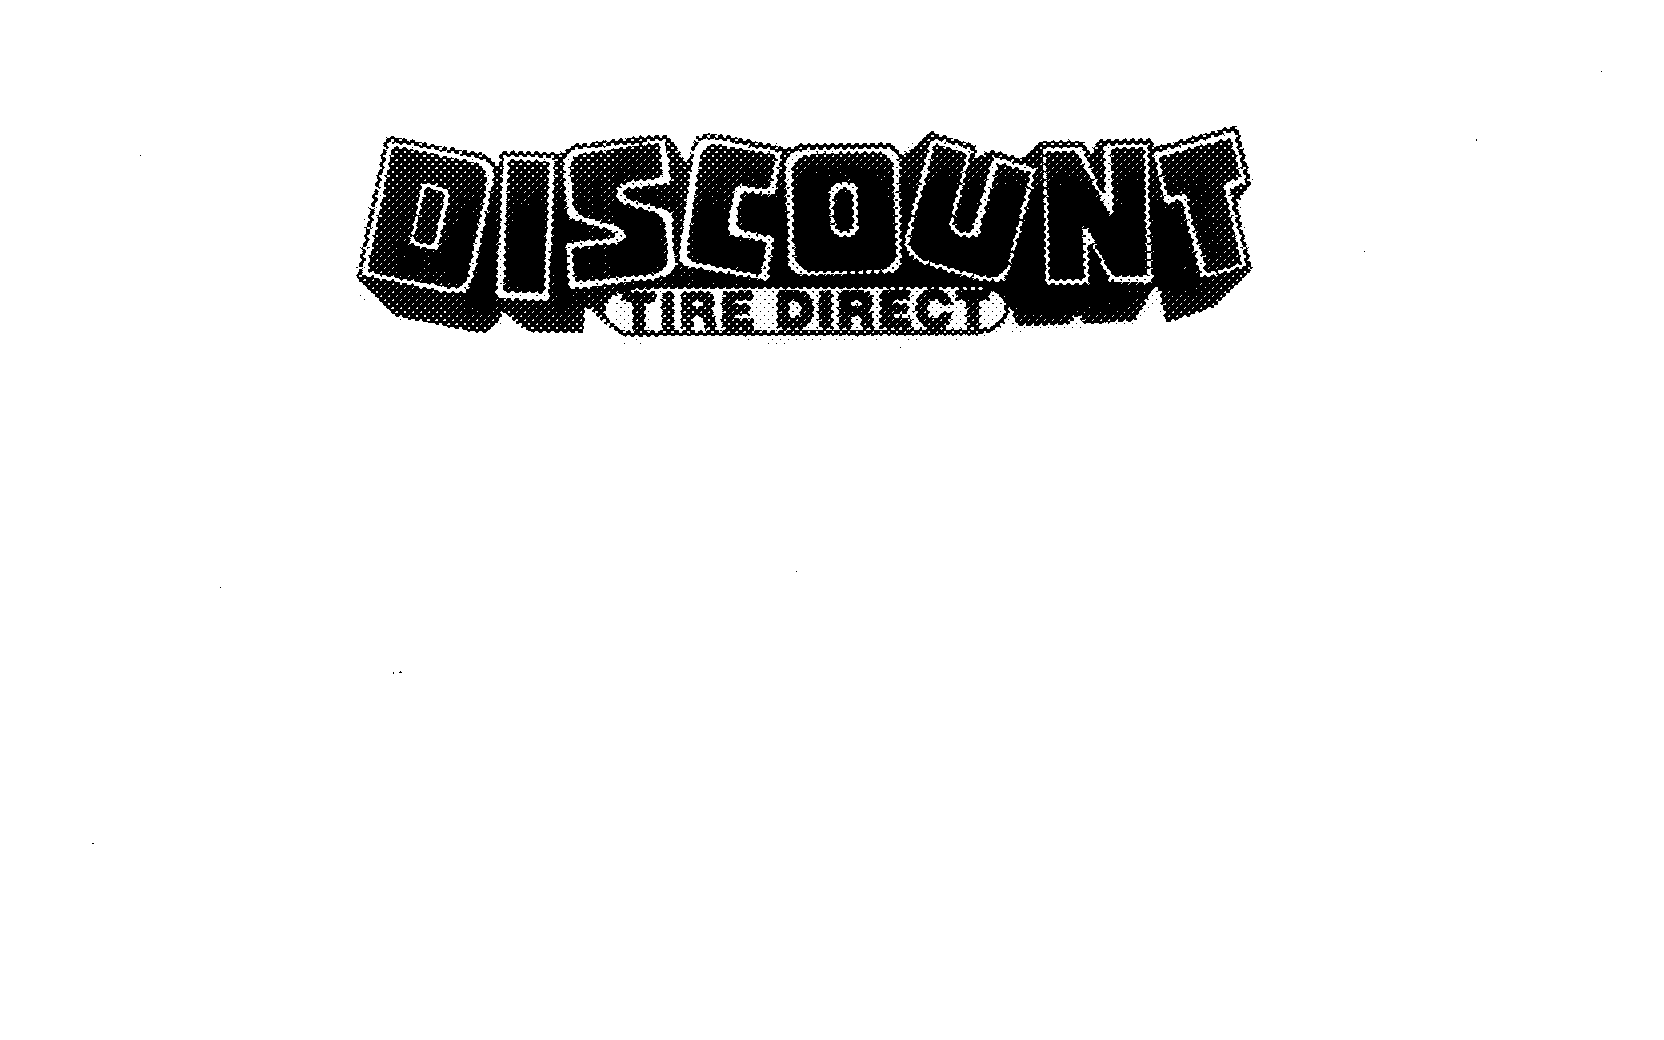 DISCOUNT TIRE DIRECT